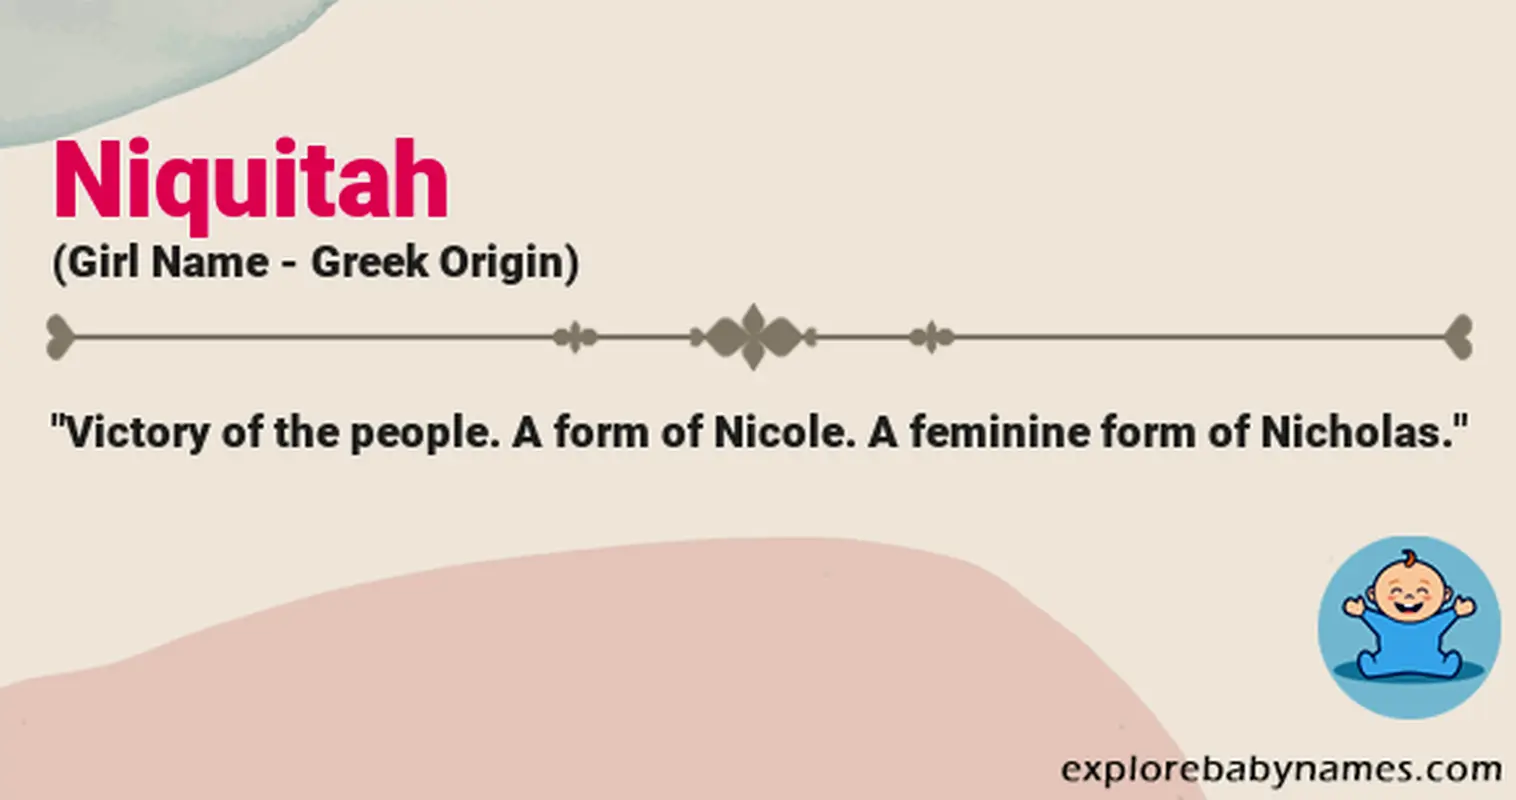 Meaning of Niquitah